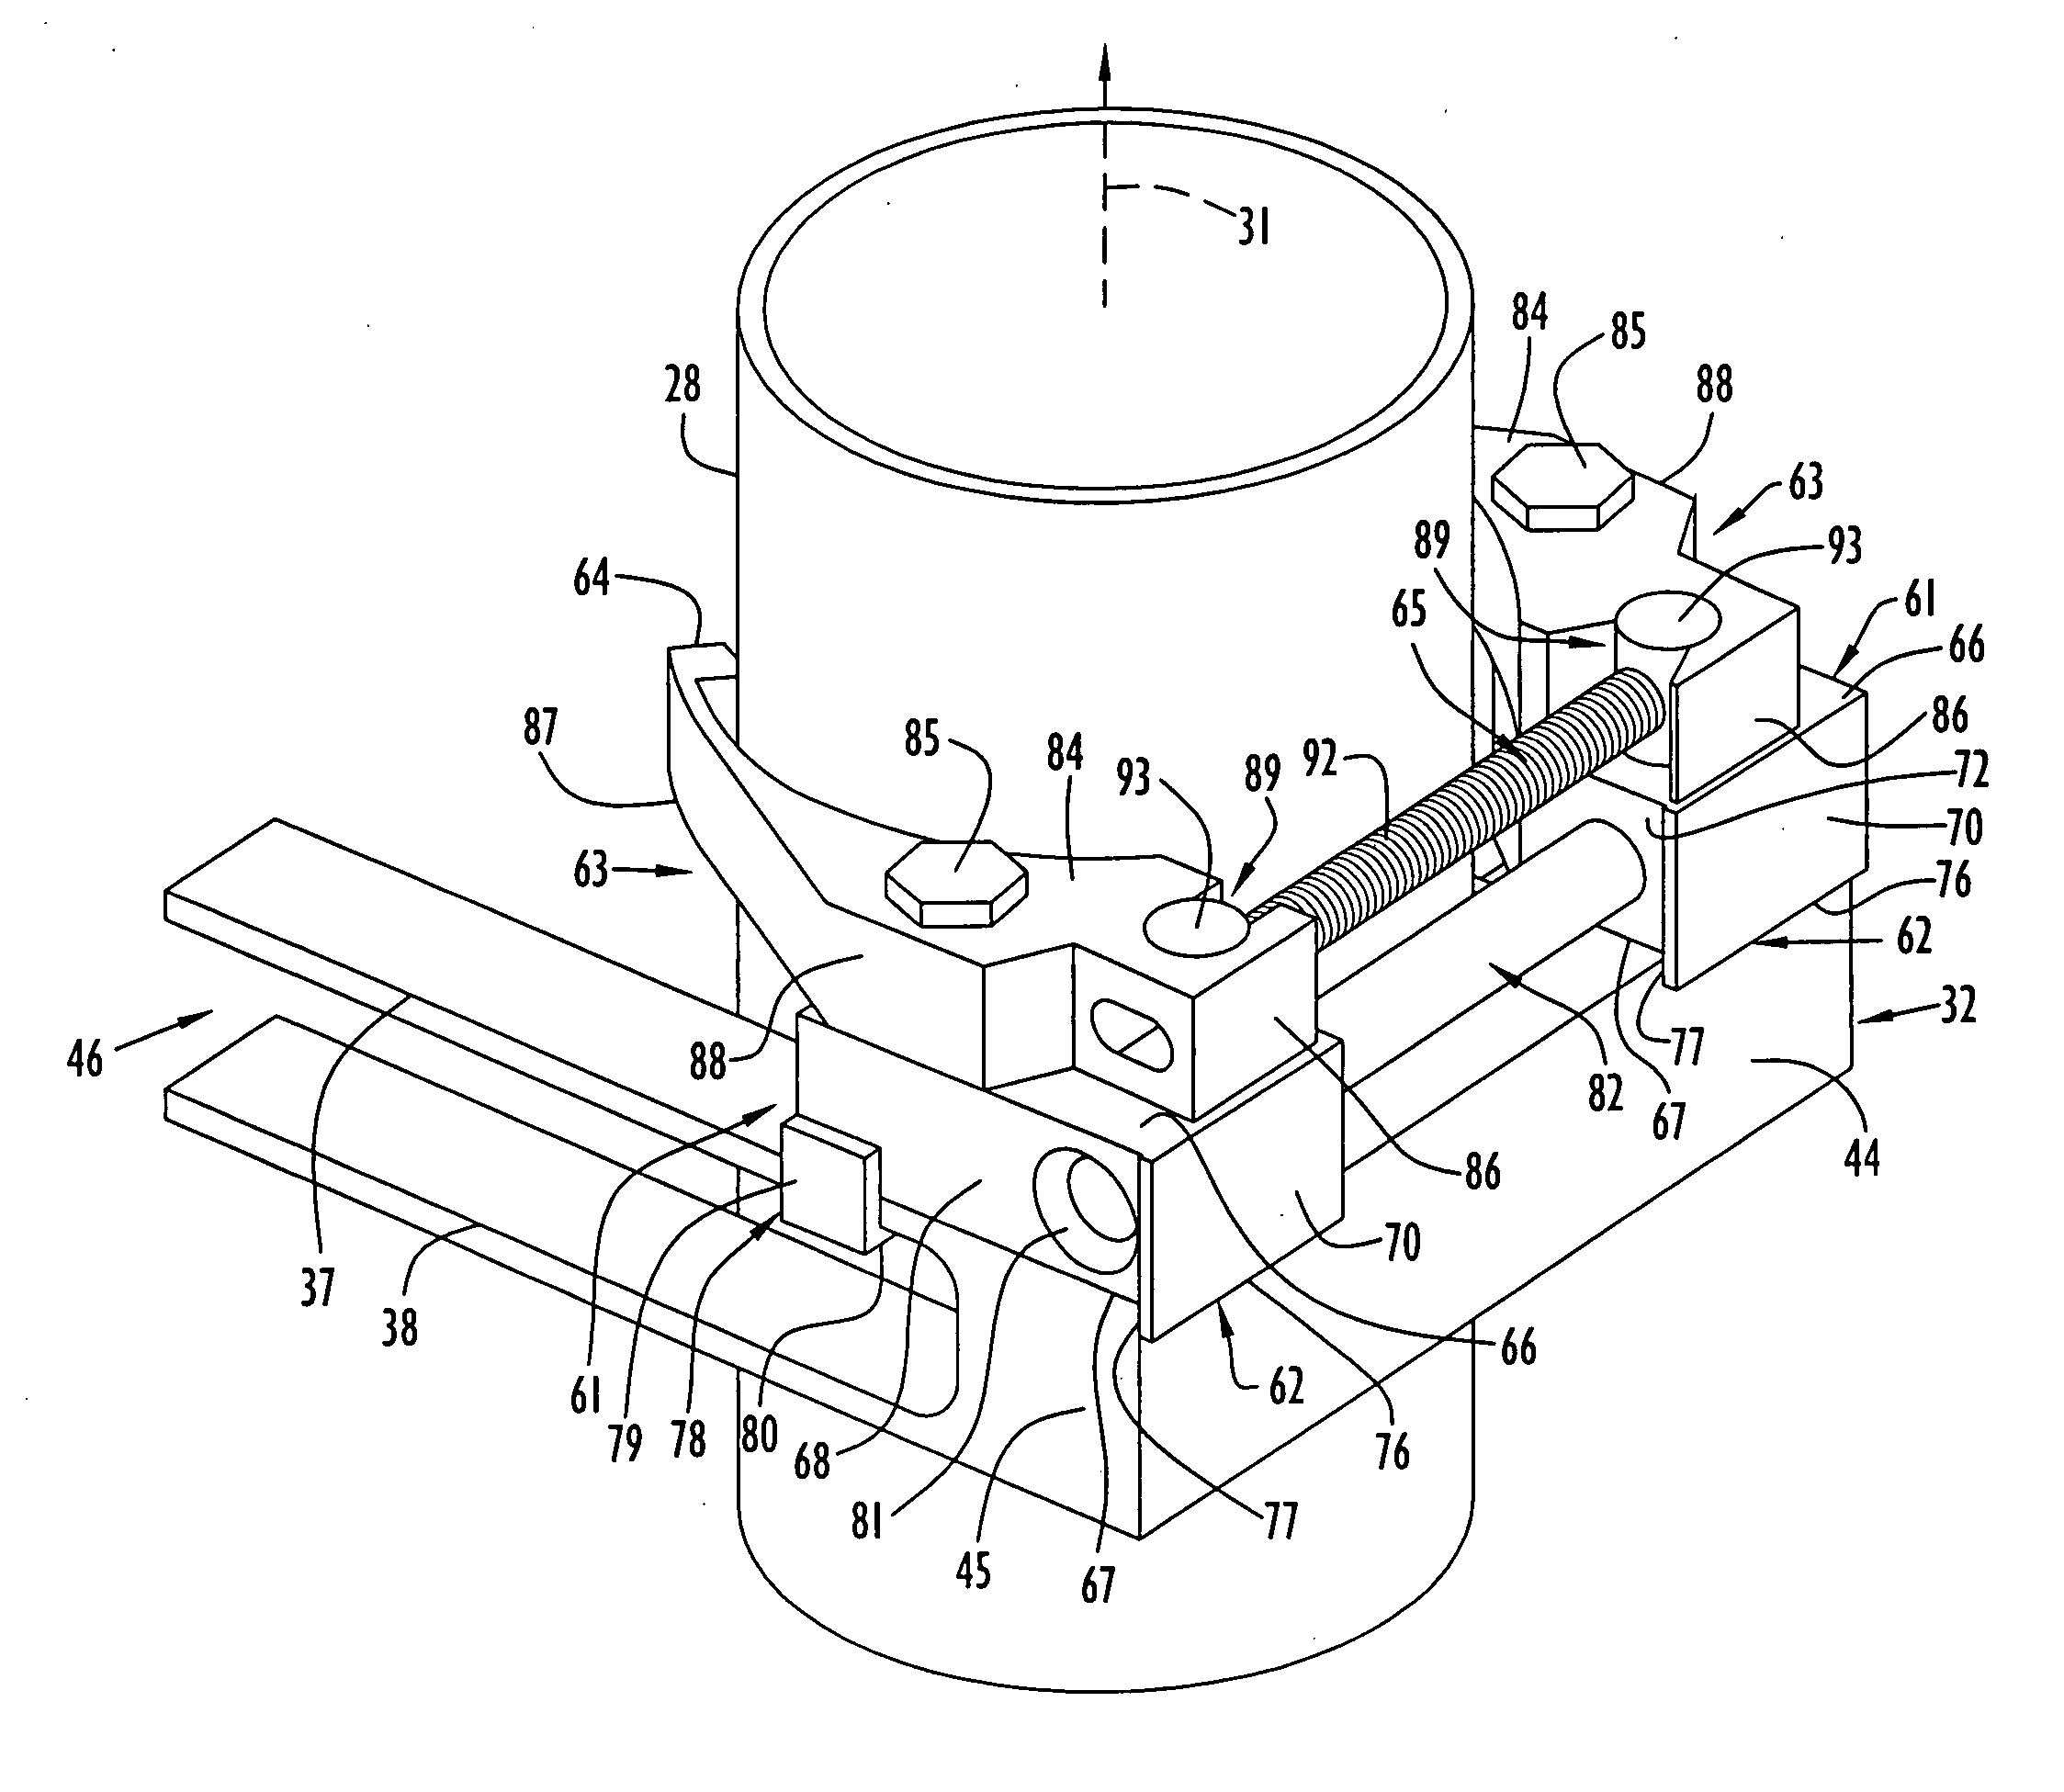 Apparatus and method for mechanically reinforcing the welds between riser pipes and riser braces in boiling water reactors